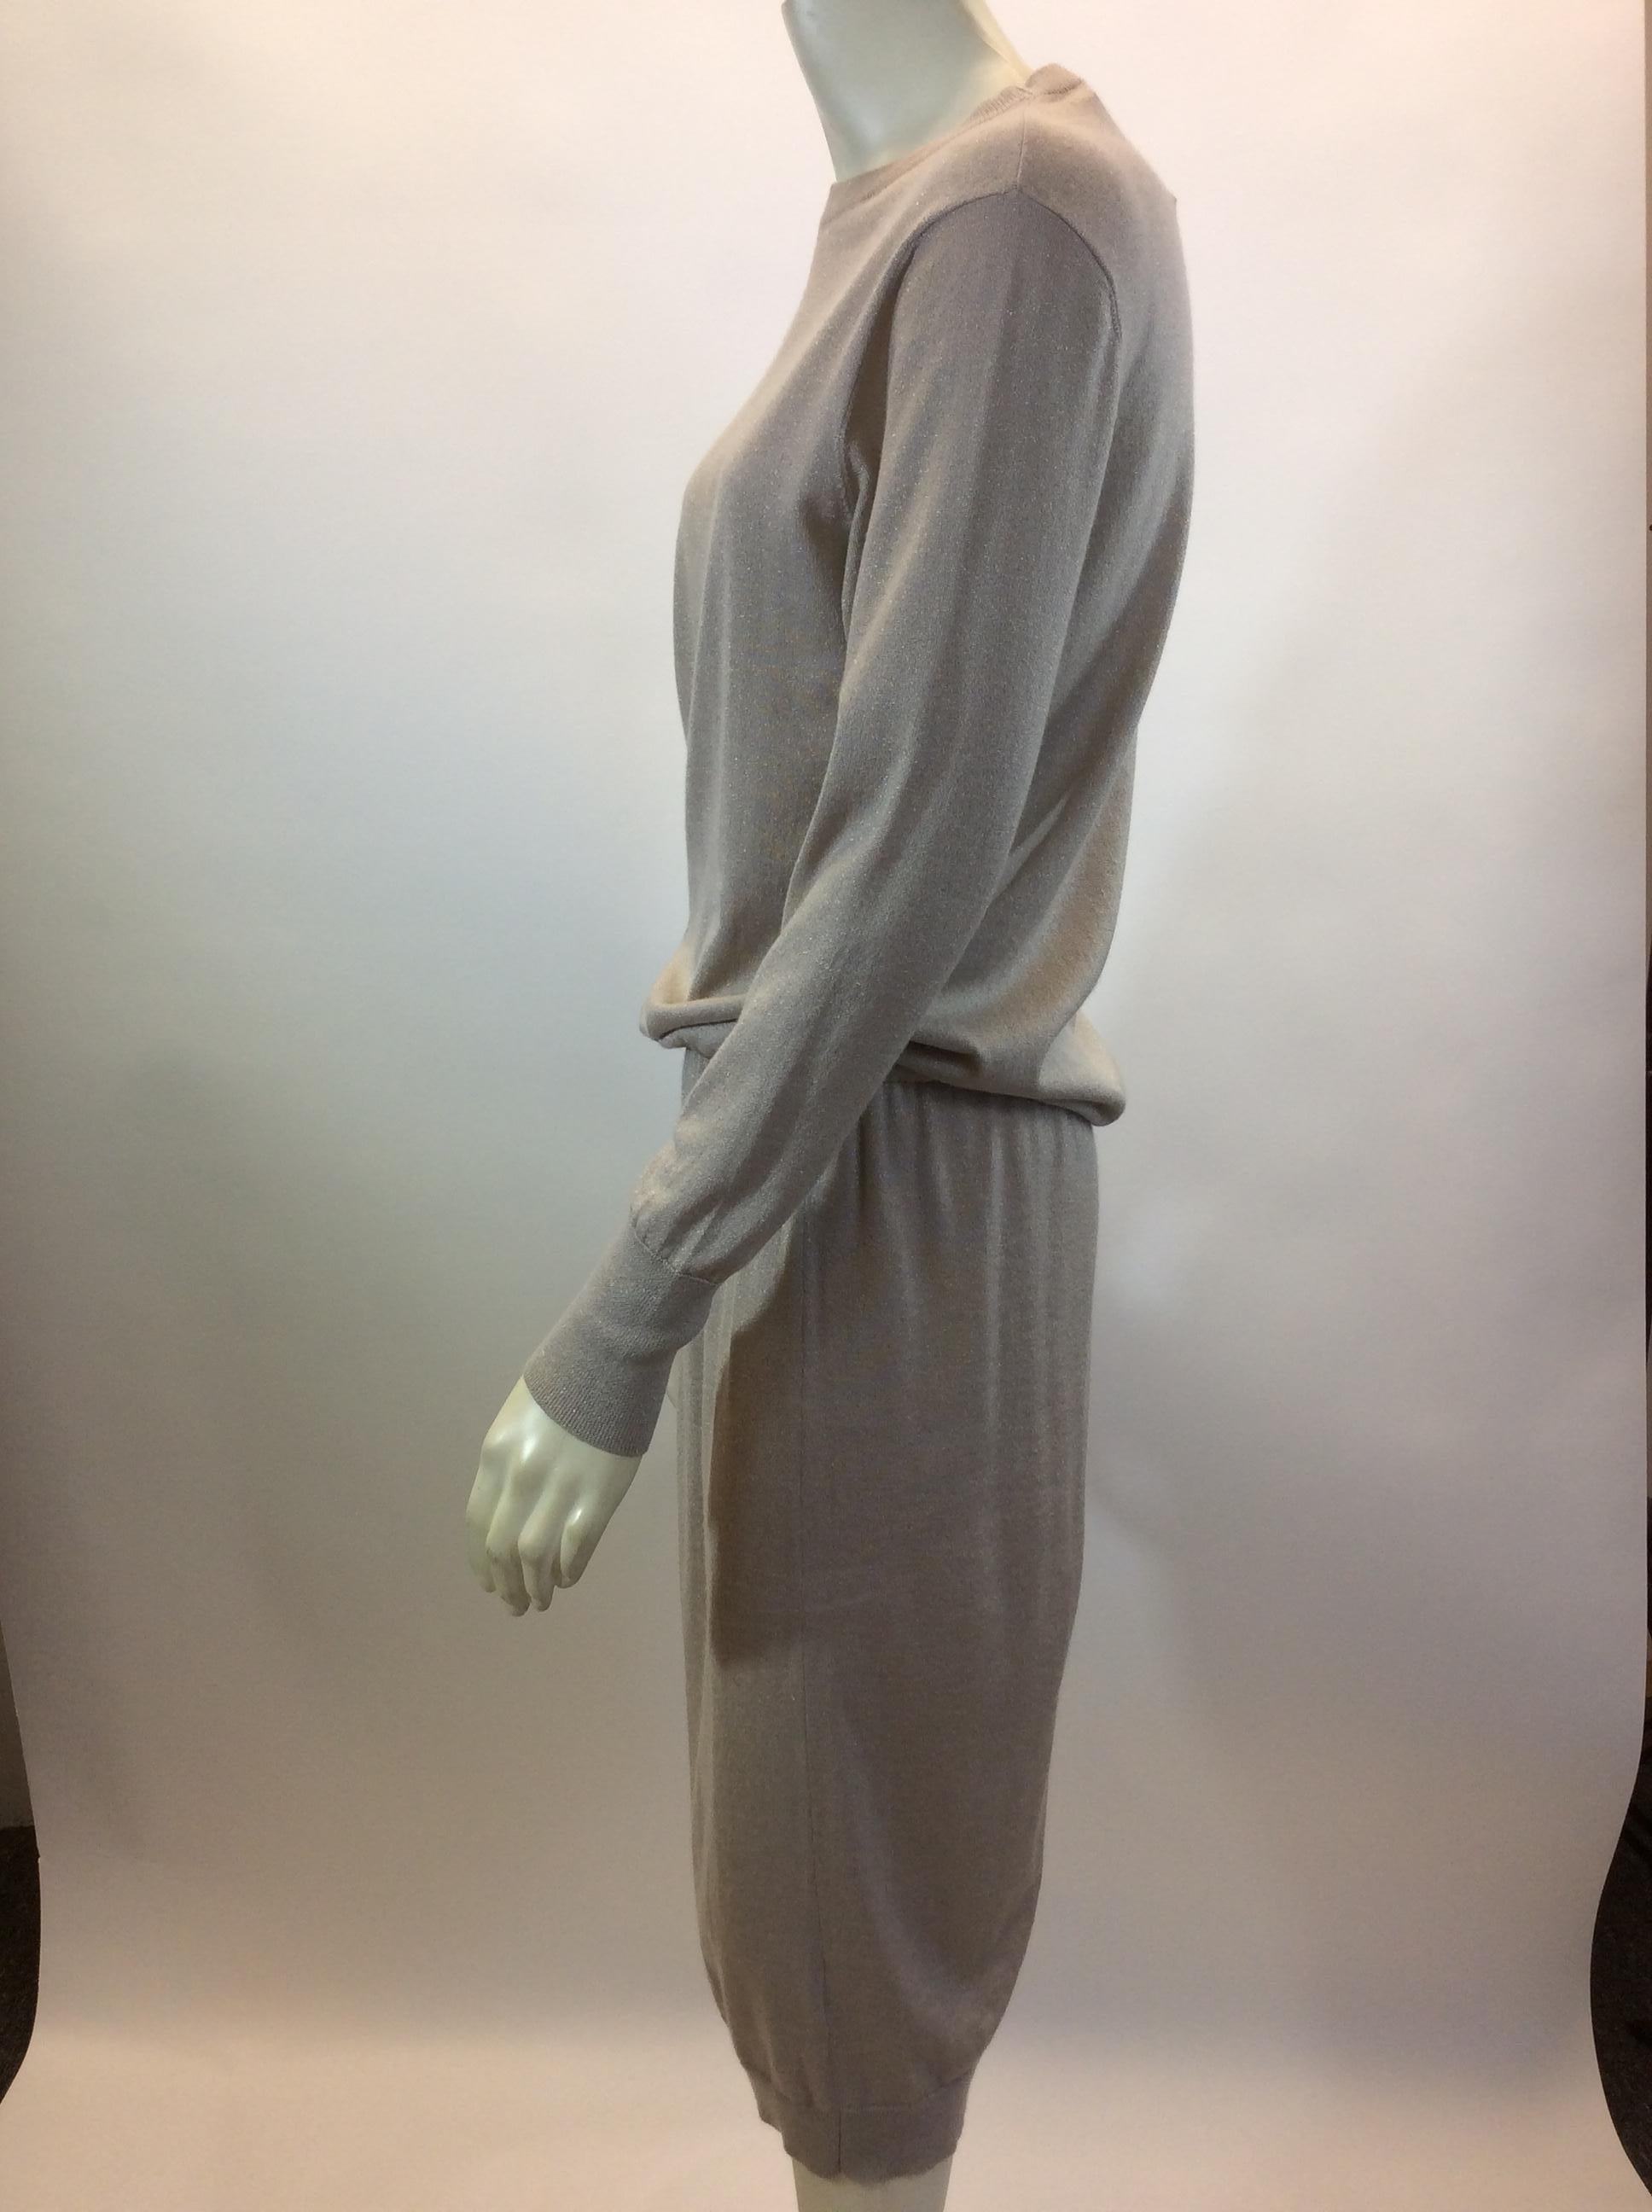 Brunello Cucinelli Tan Cashmere Dress
$299
Made in Italy
51% cashmere, 22% silk, 20% polyamide, 7% metallic polyester
Size Small
Length 46.5